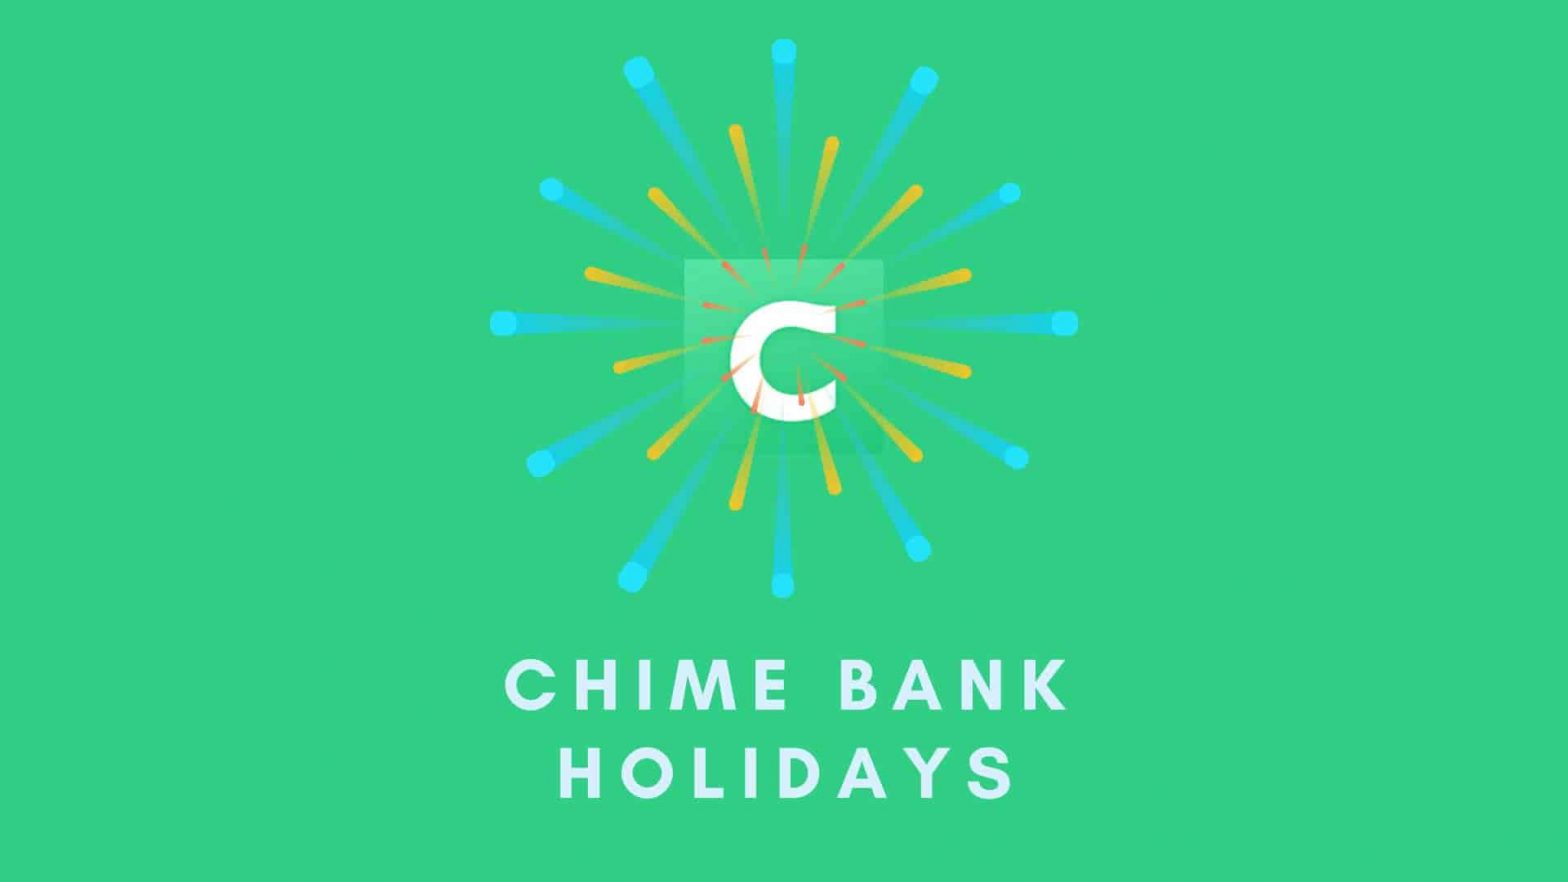 Chime bank holidays schedules